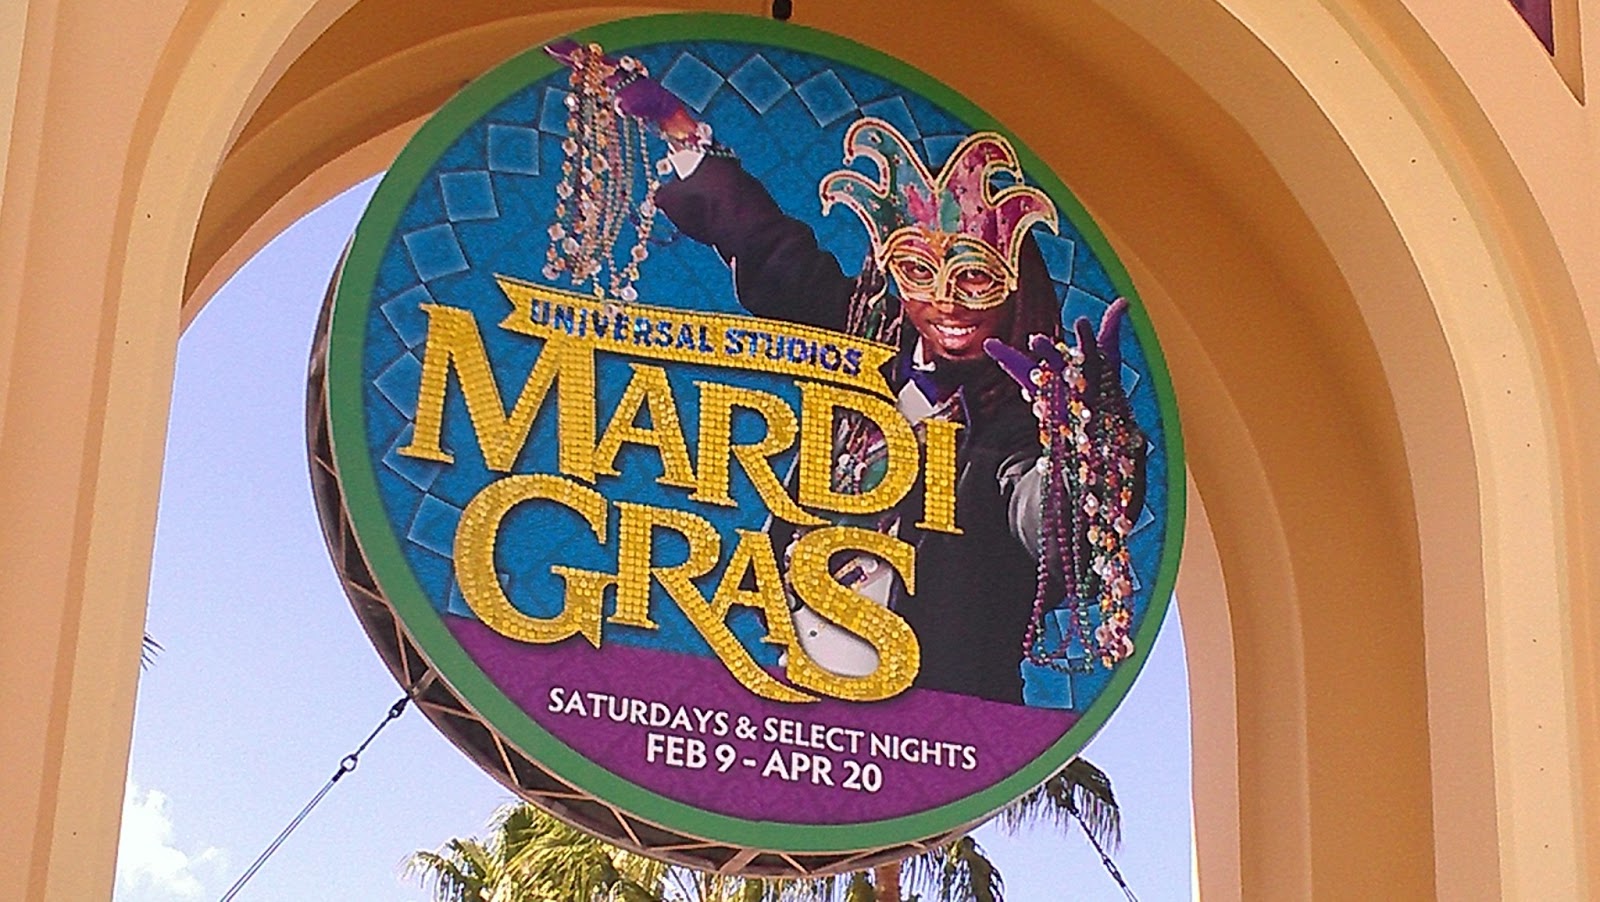 Orlando Area Theme Parks, Attractions, and Eateries Mardi Gras at